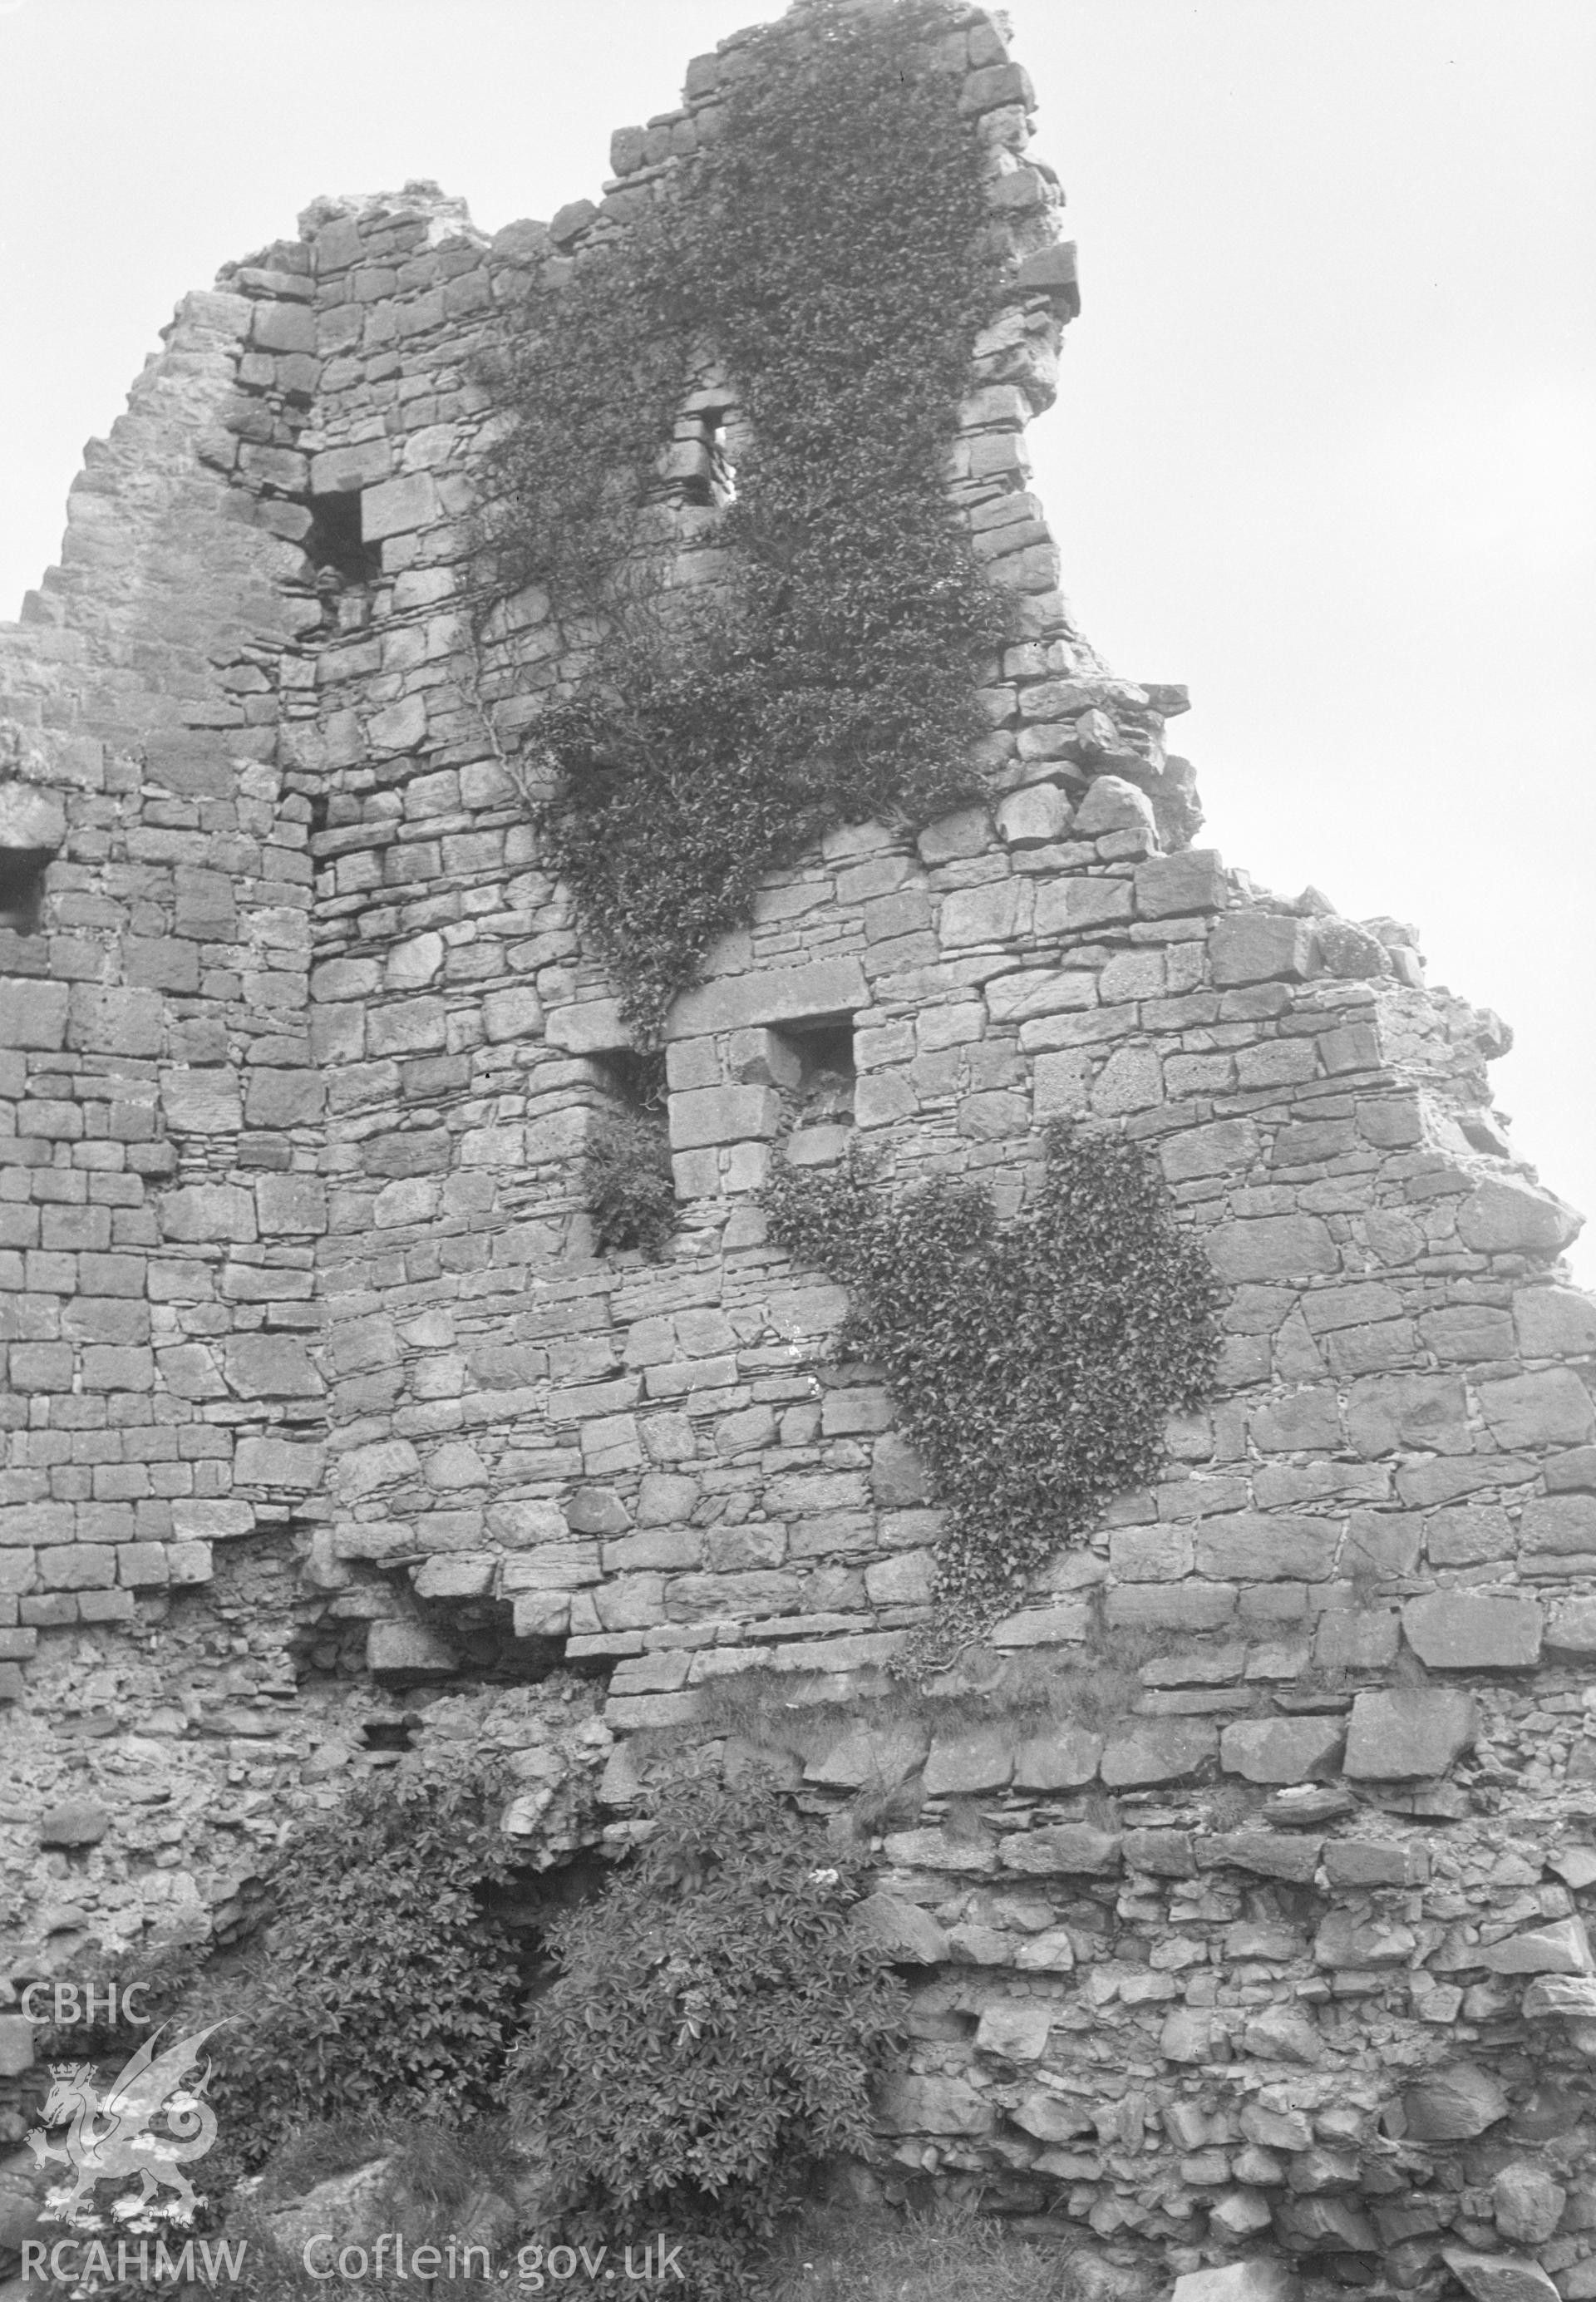 Digital copy of a nitrate negative showing detailed view of Caergwrle Castle. From the Cadw Monuments in Care Collection.